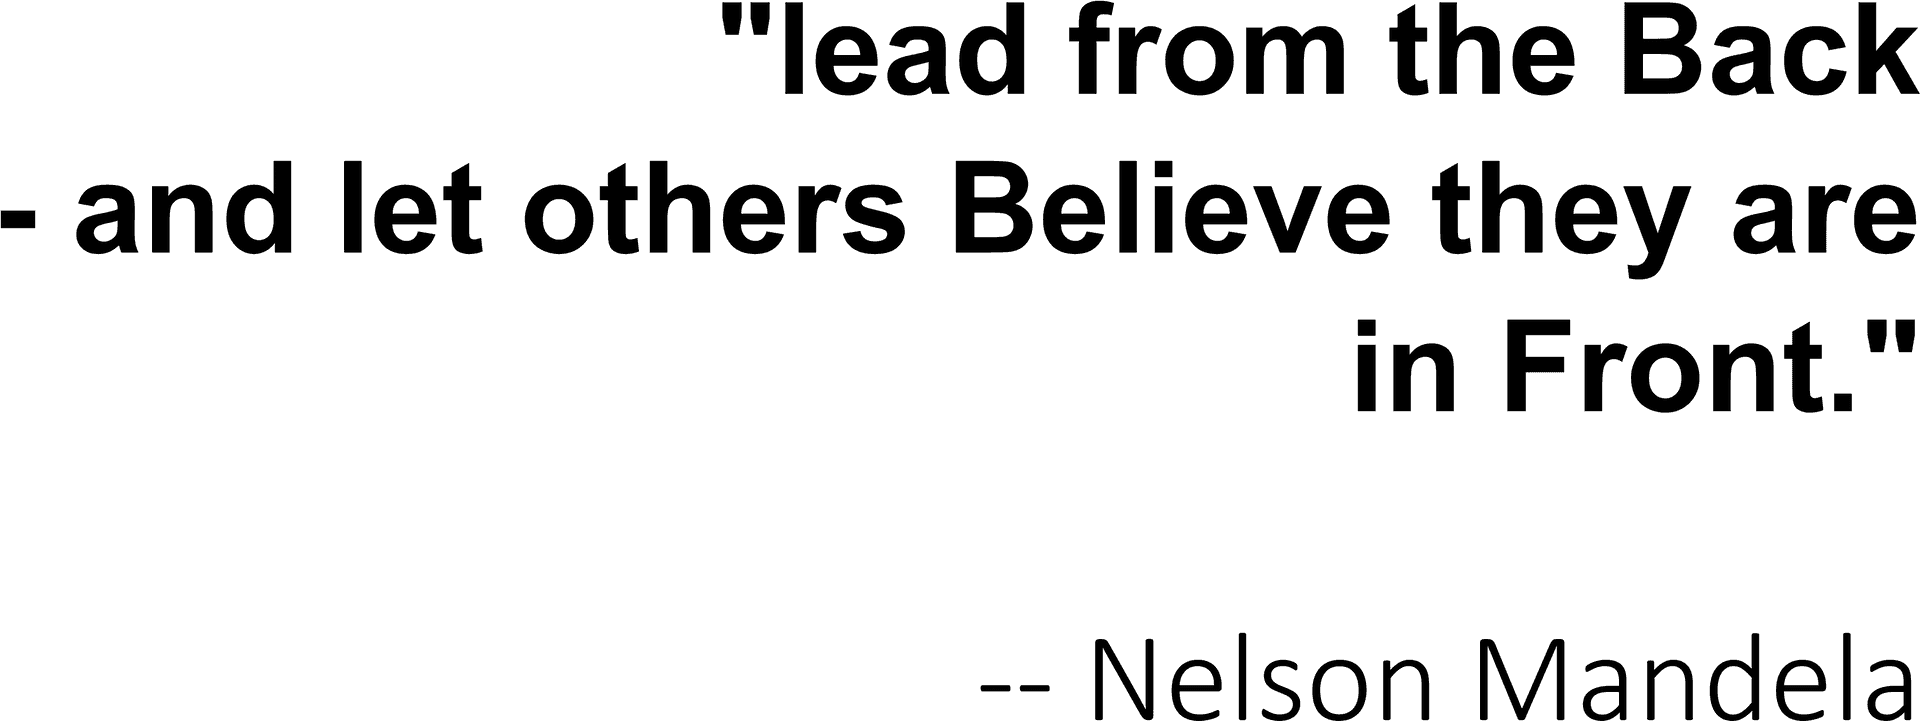 Nelson Mandela Leadership Quote PNG